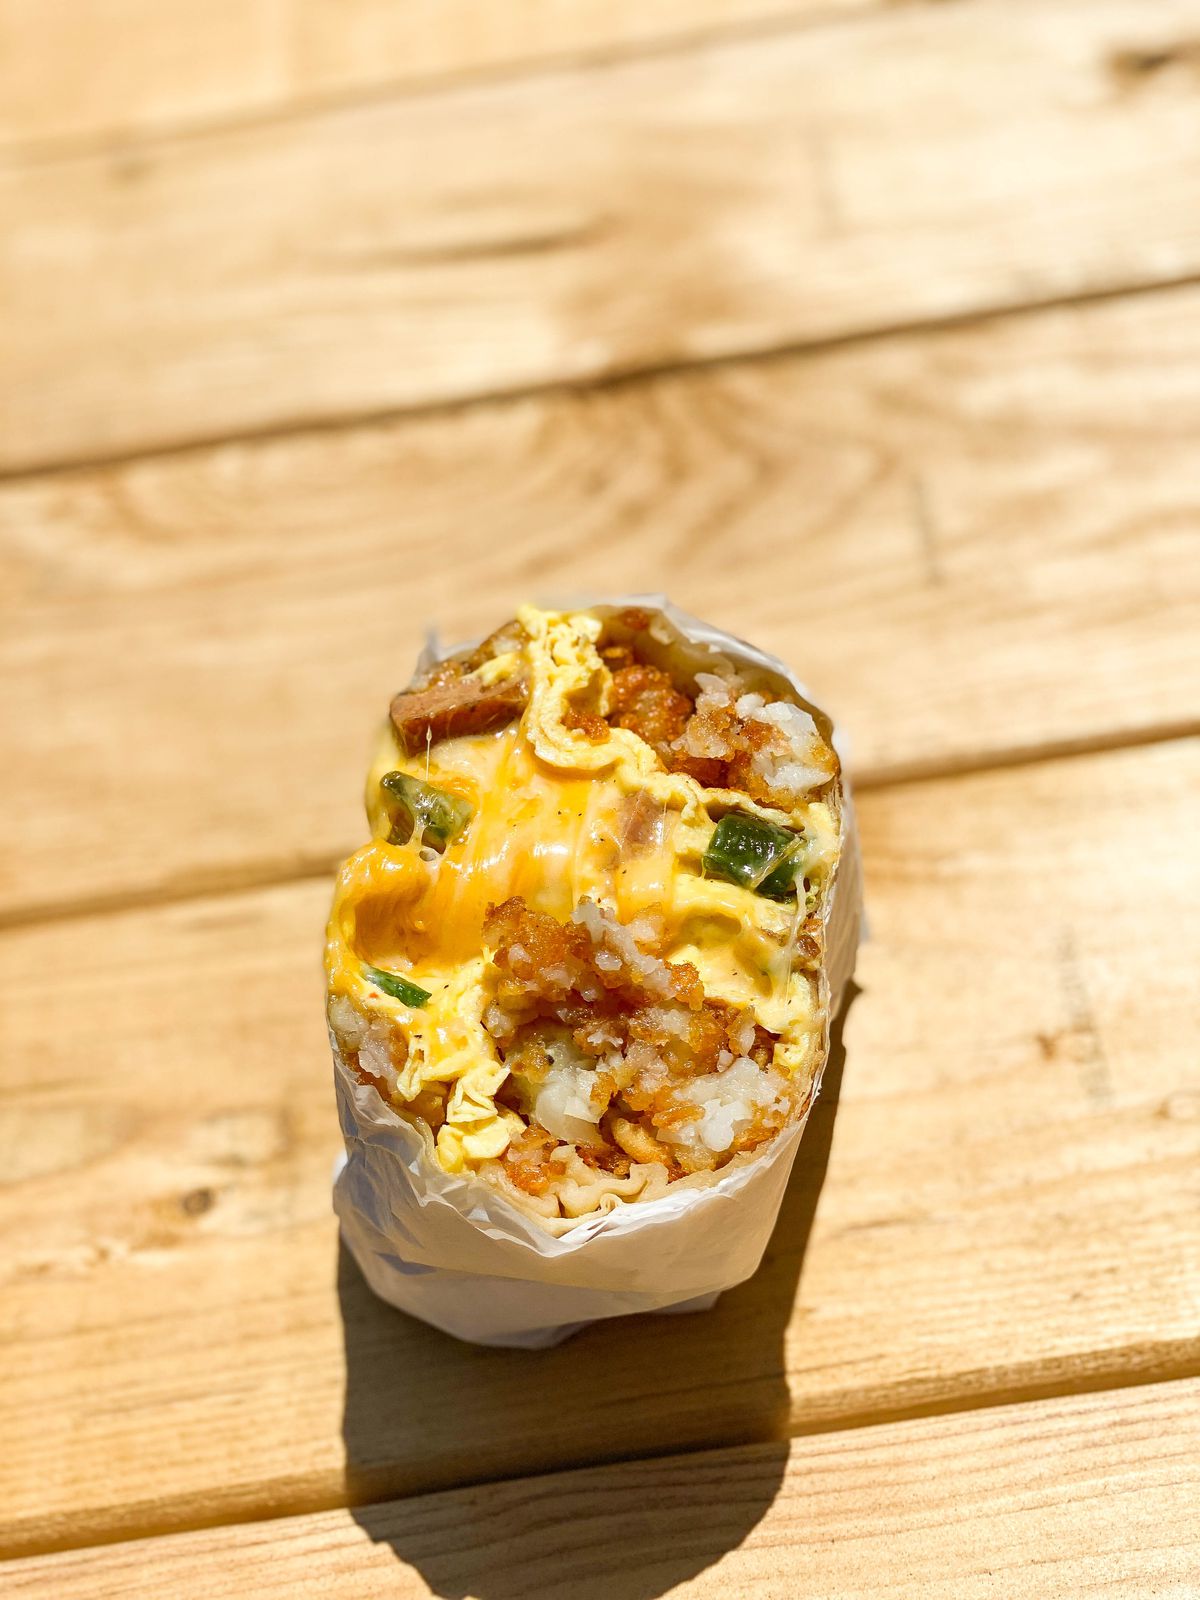 A split vertical look at a cheesy breakfast burrito on a bright wooden table.